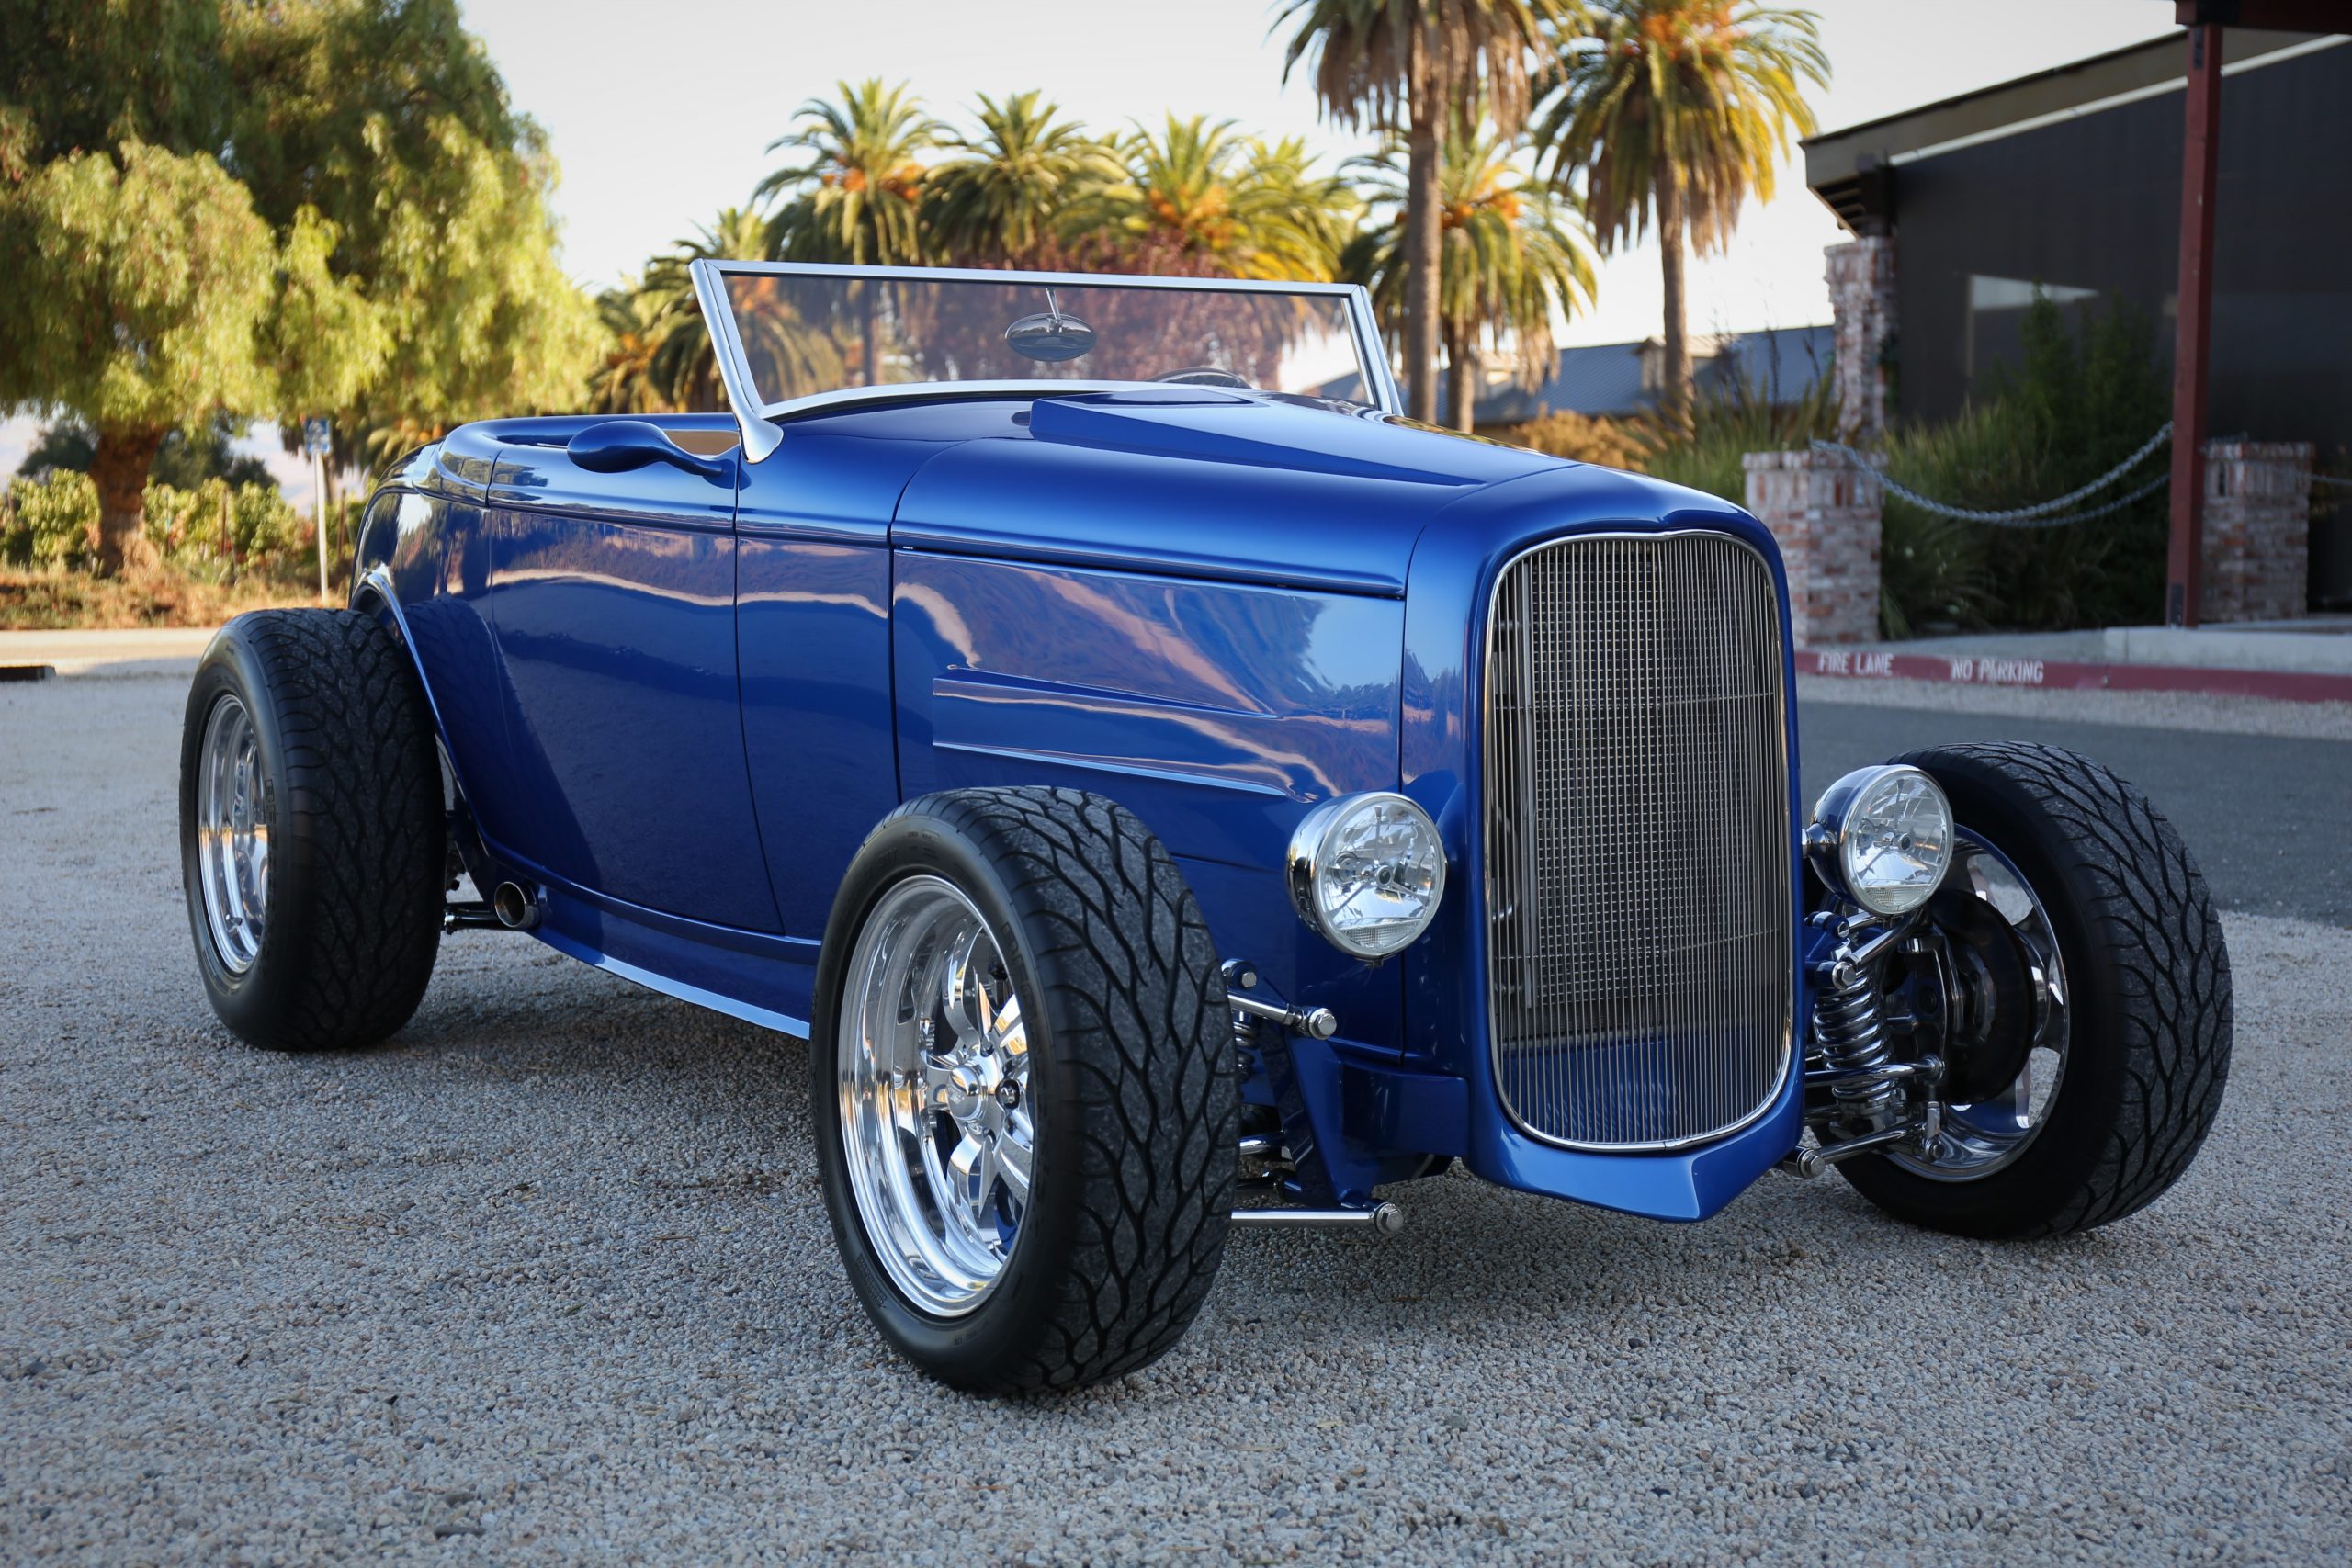 Electric Blue 1932 Ford Highboy Roadster, Tan Leather Interior, 5.7 Liter LS1 Engine, 4-Speed Automatic Transmission